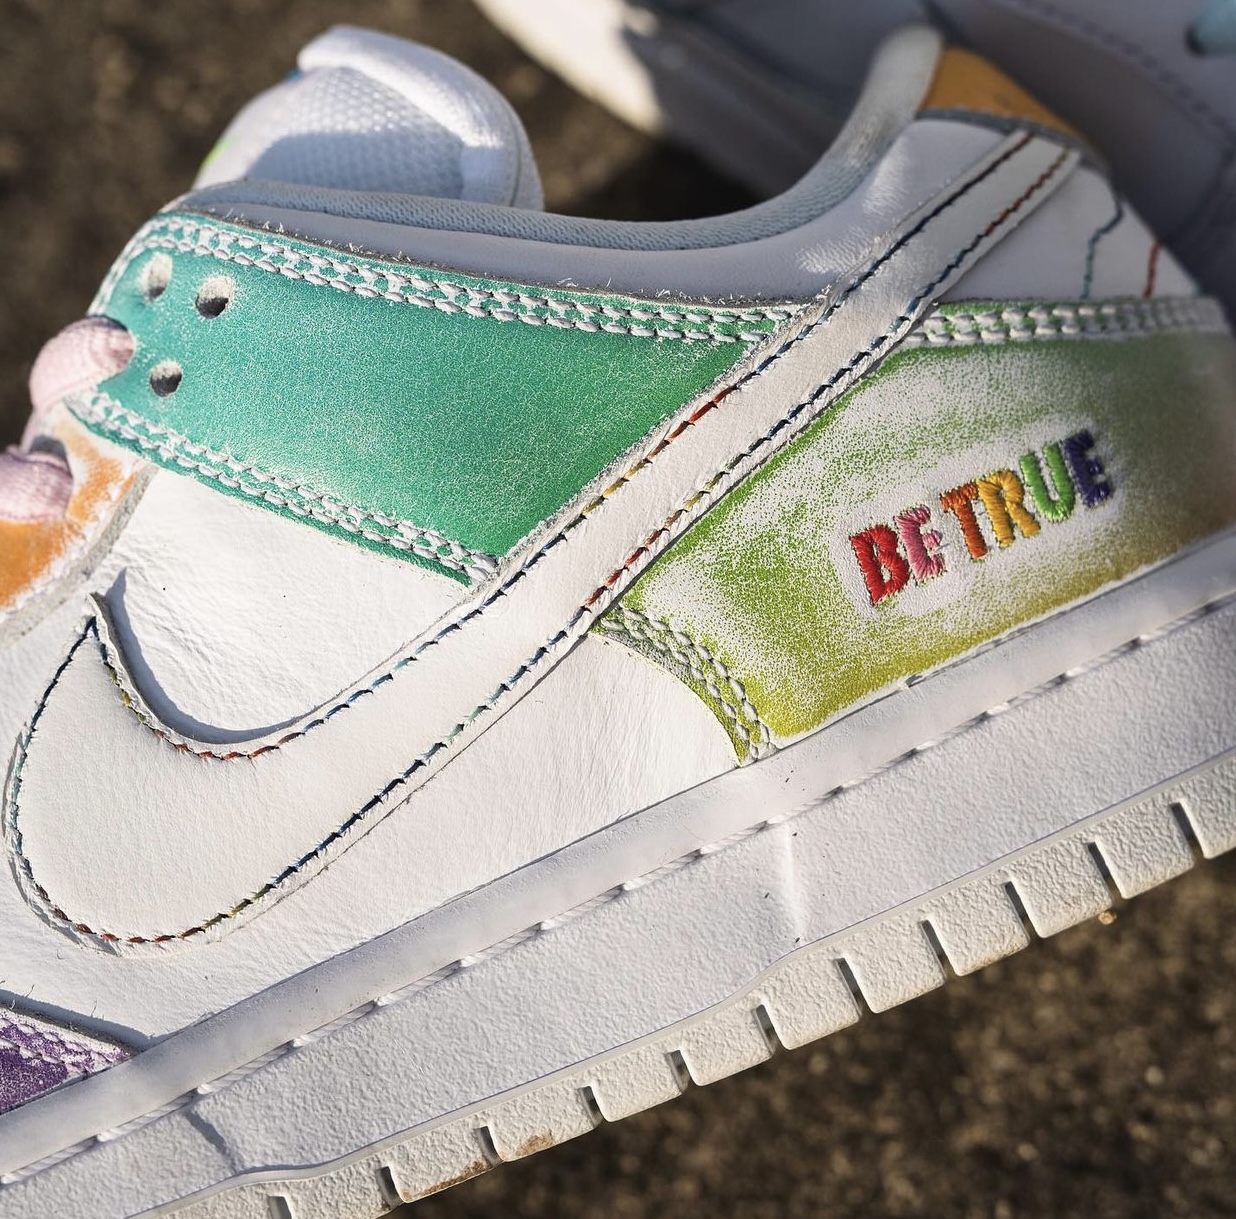 nike sb dunk mid premium tv shows 2022 DR4876-100 Release Date